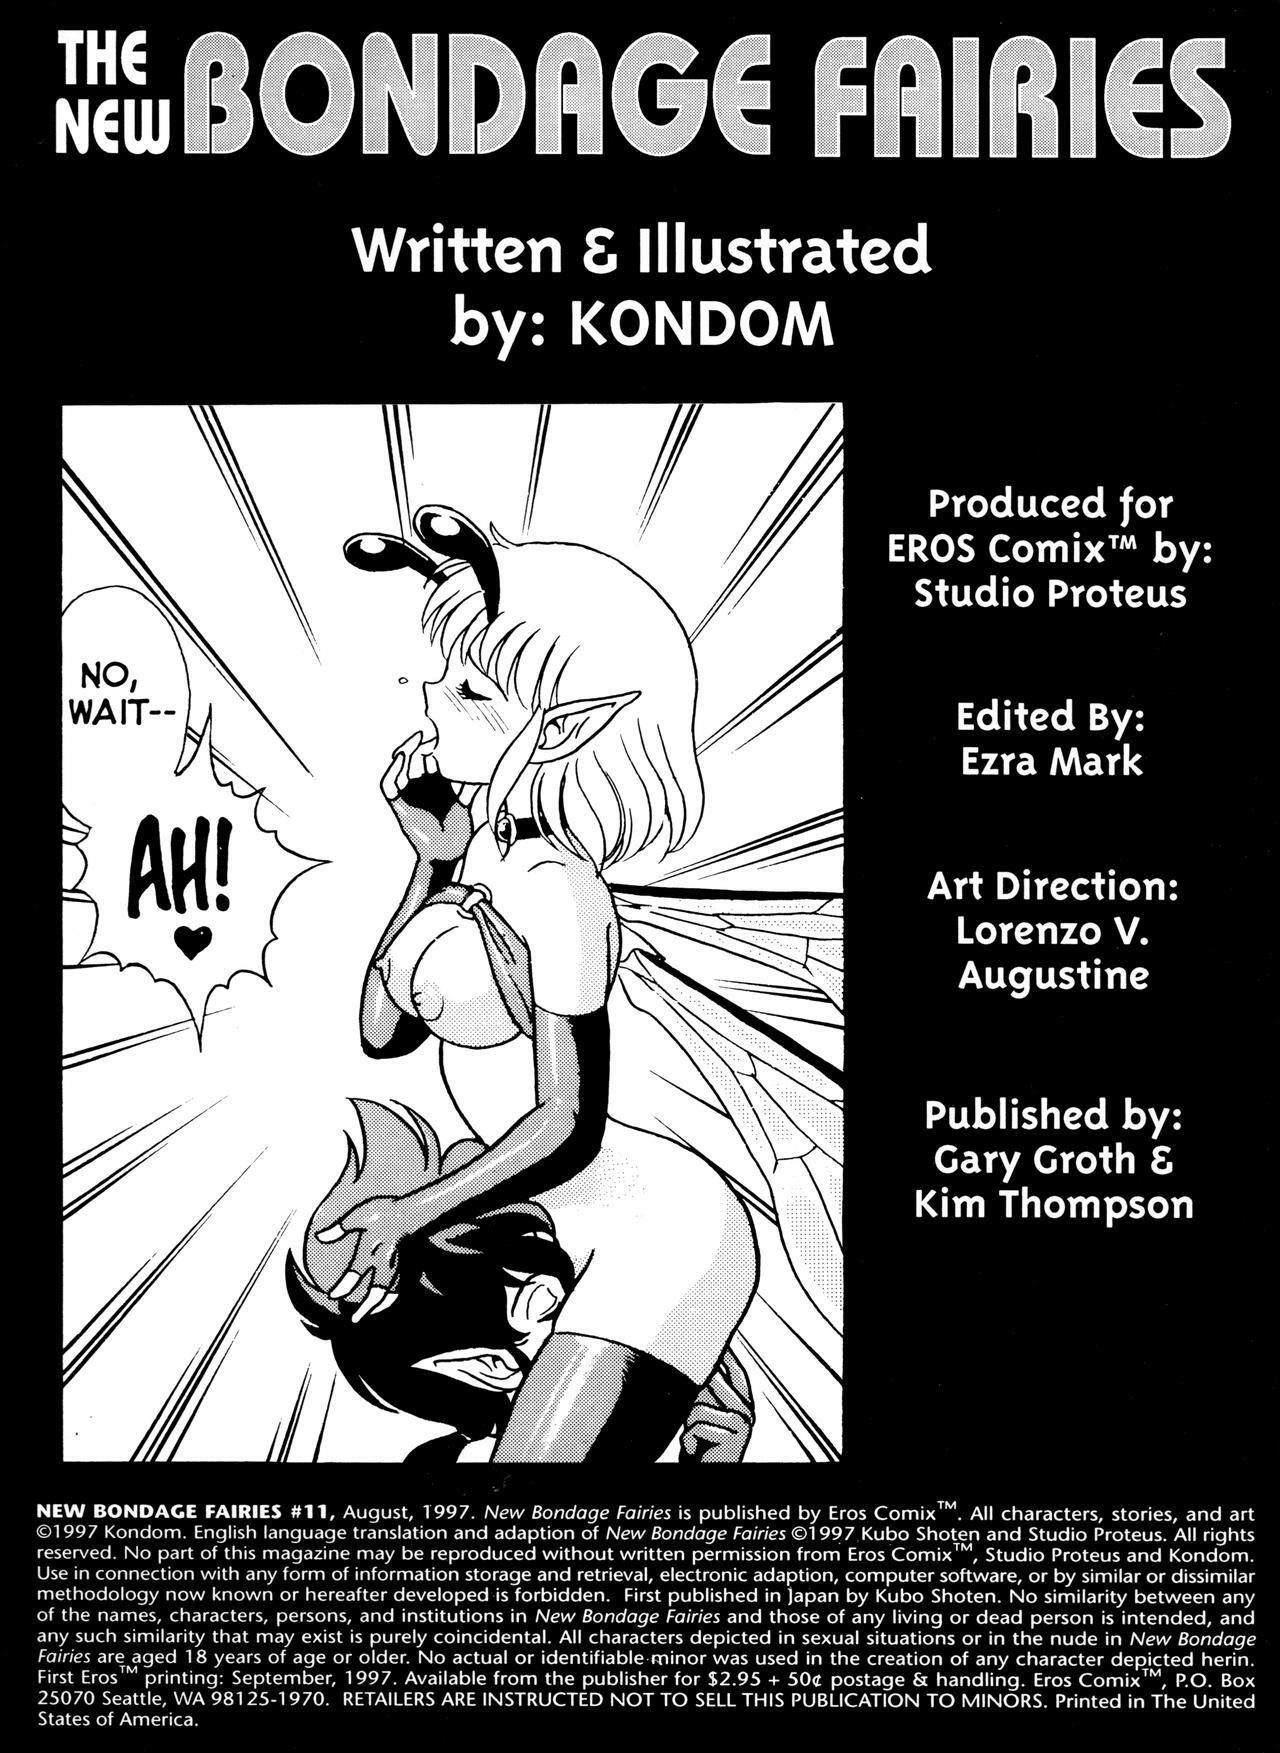 [Kondom] The New Bondage Fairies Issue 11 [ENG][Hi-Res] page 2 full